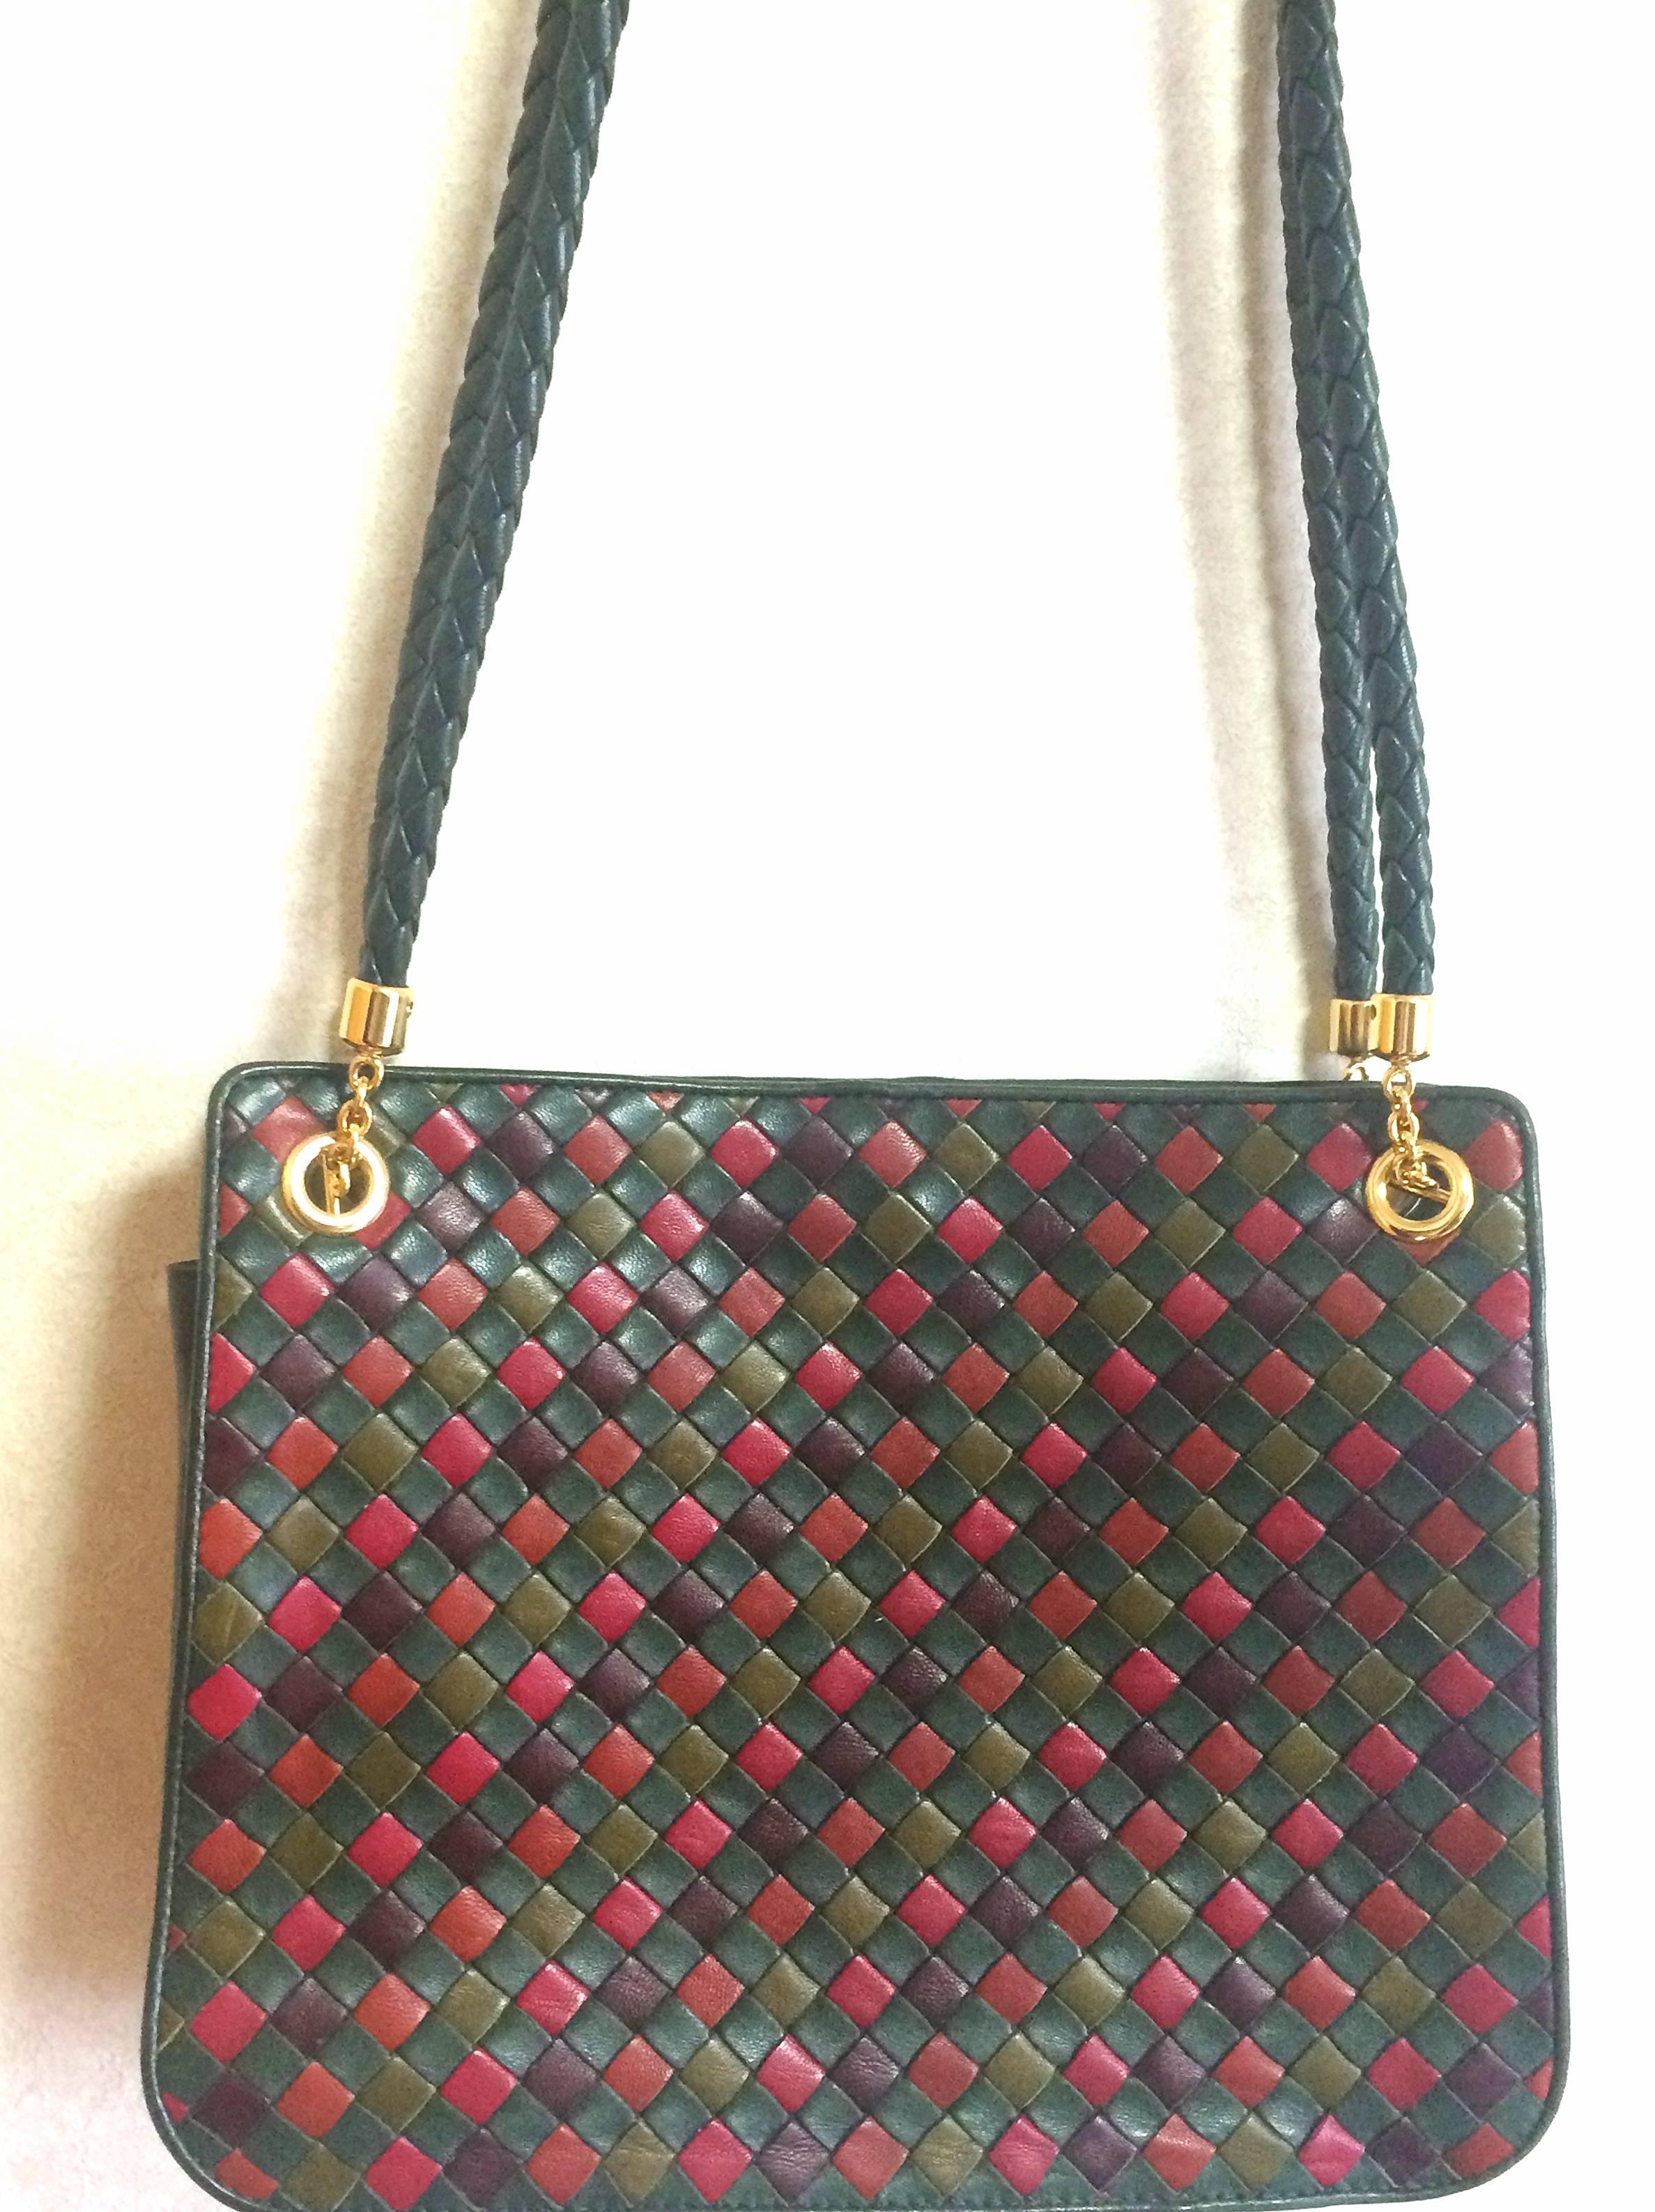 Vintage Bottega Veneta intrecciato woven lambskin shoulder tote bag in red, wine, orange, green, and khaki. Multicolor rare purse.

If you are looking for a rare and unique vintage Bottega Veneta's intrecciato, then this is definitely a must-have